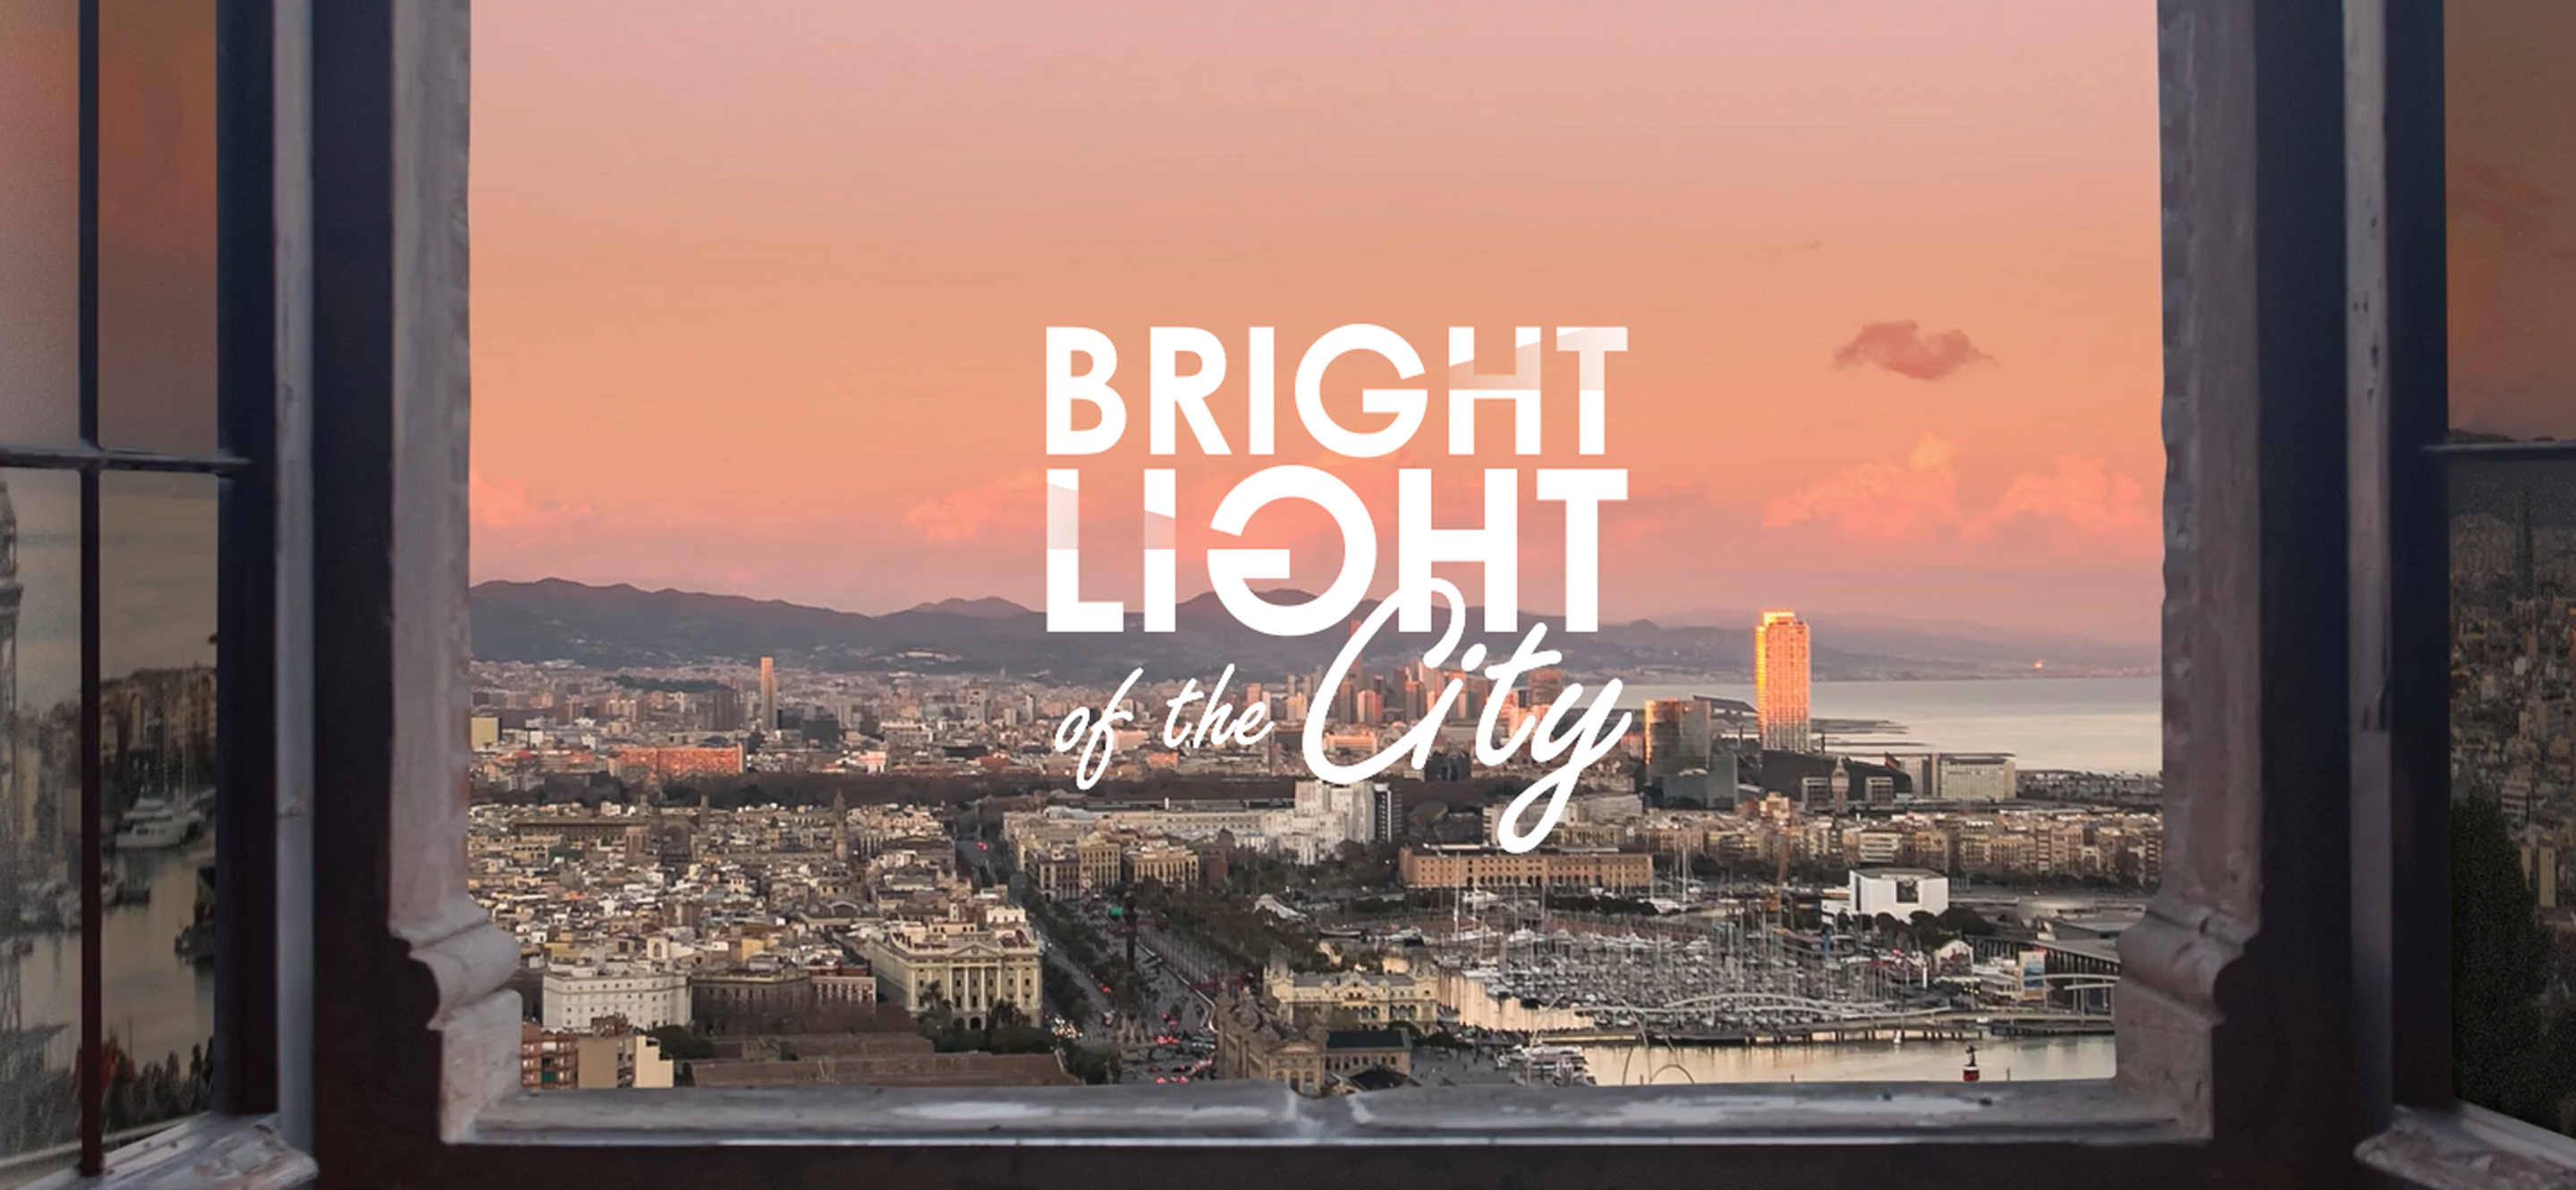 The UITP Global Public Transport Summit will shine in Barcelona under the theme “Bright Light of